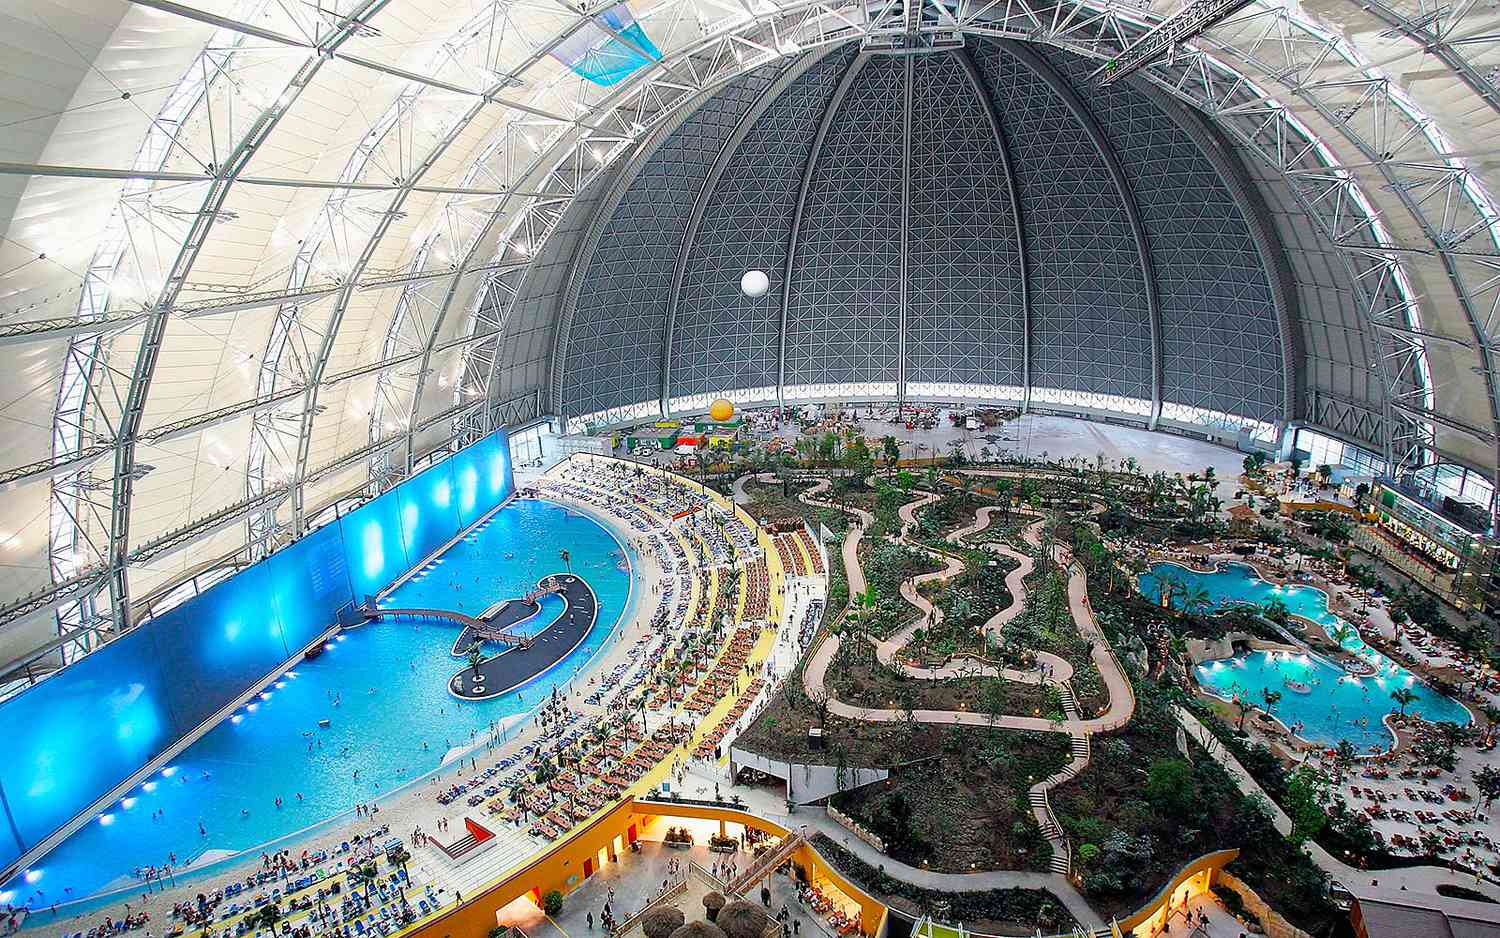 Inside the Biggest Water Park in the World